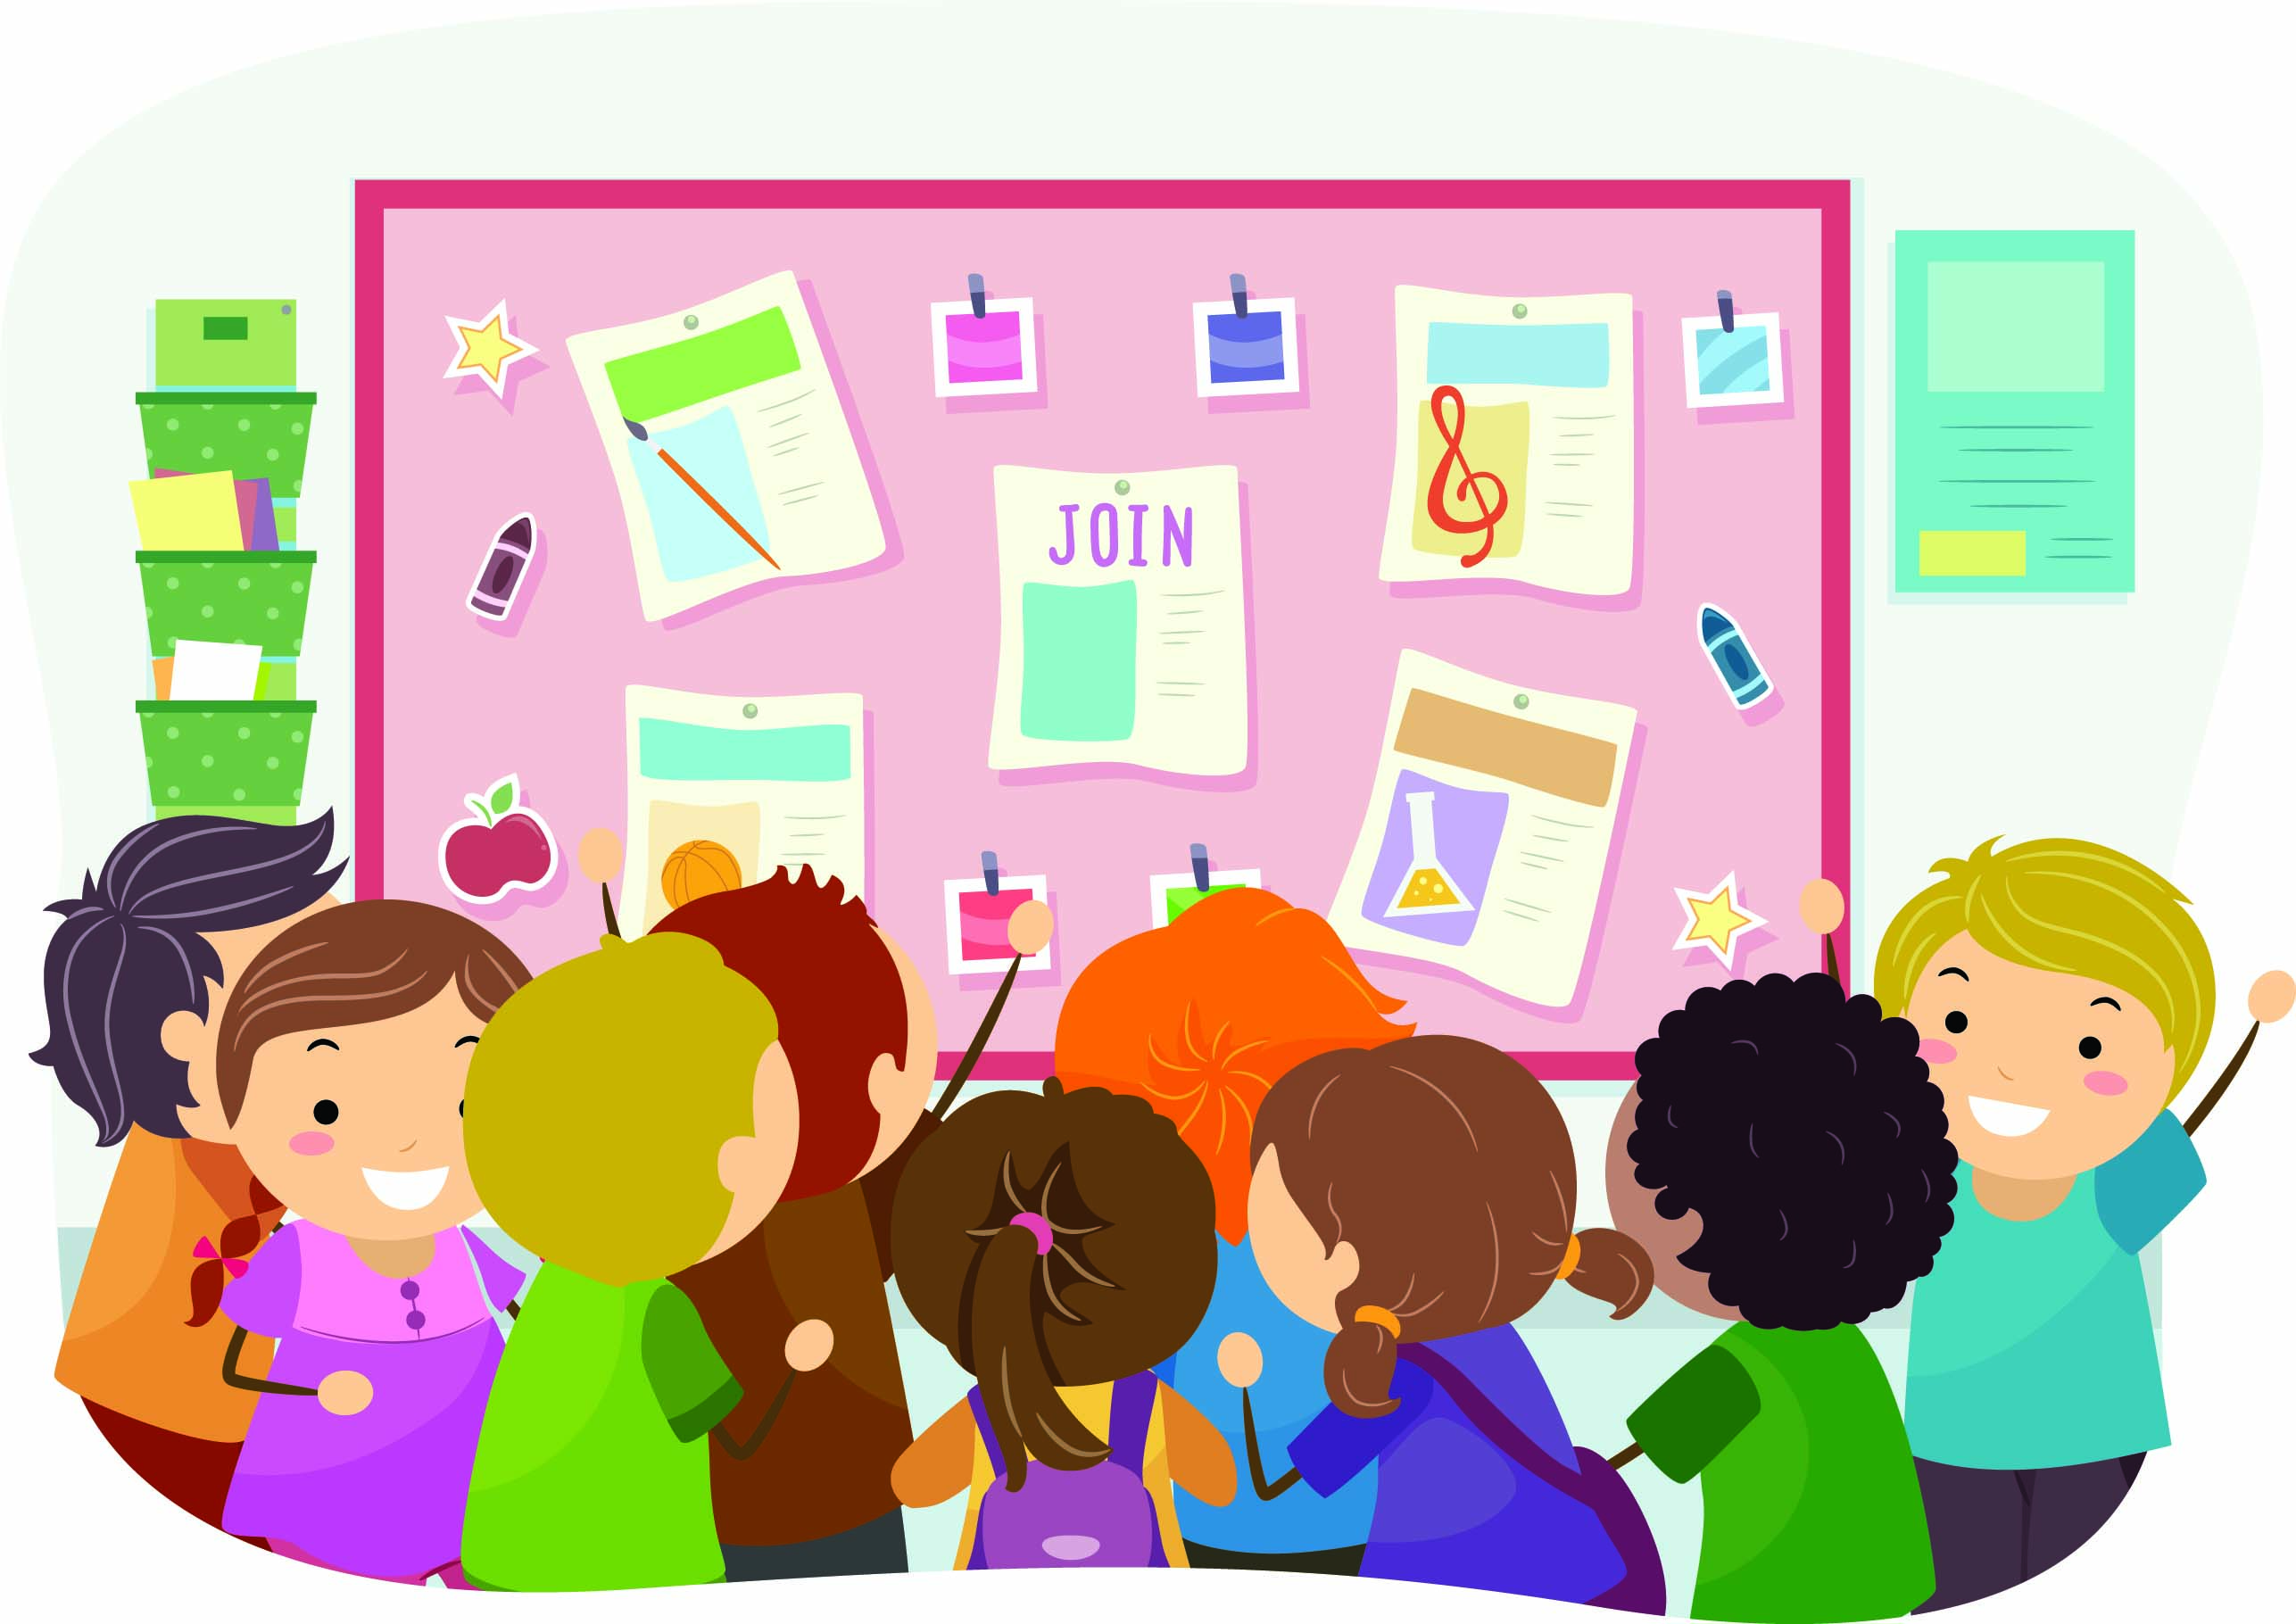 clip art image of students looking at a bulletin board with extracurricular activities and flyer that says "Join"